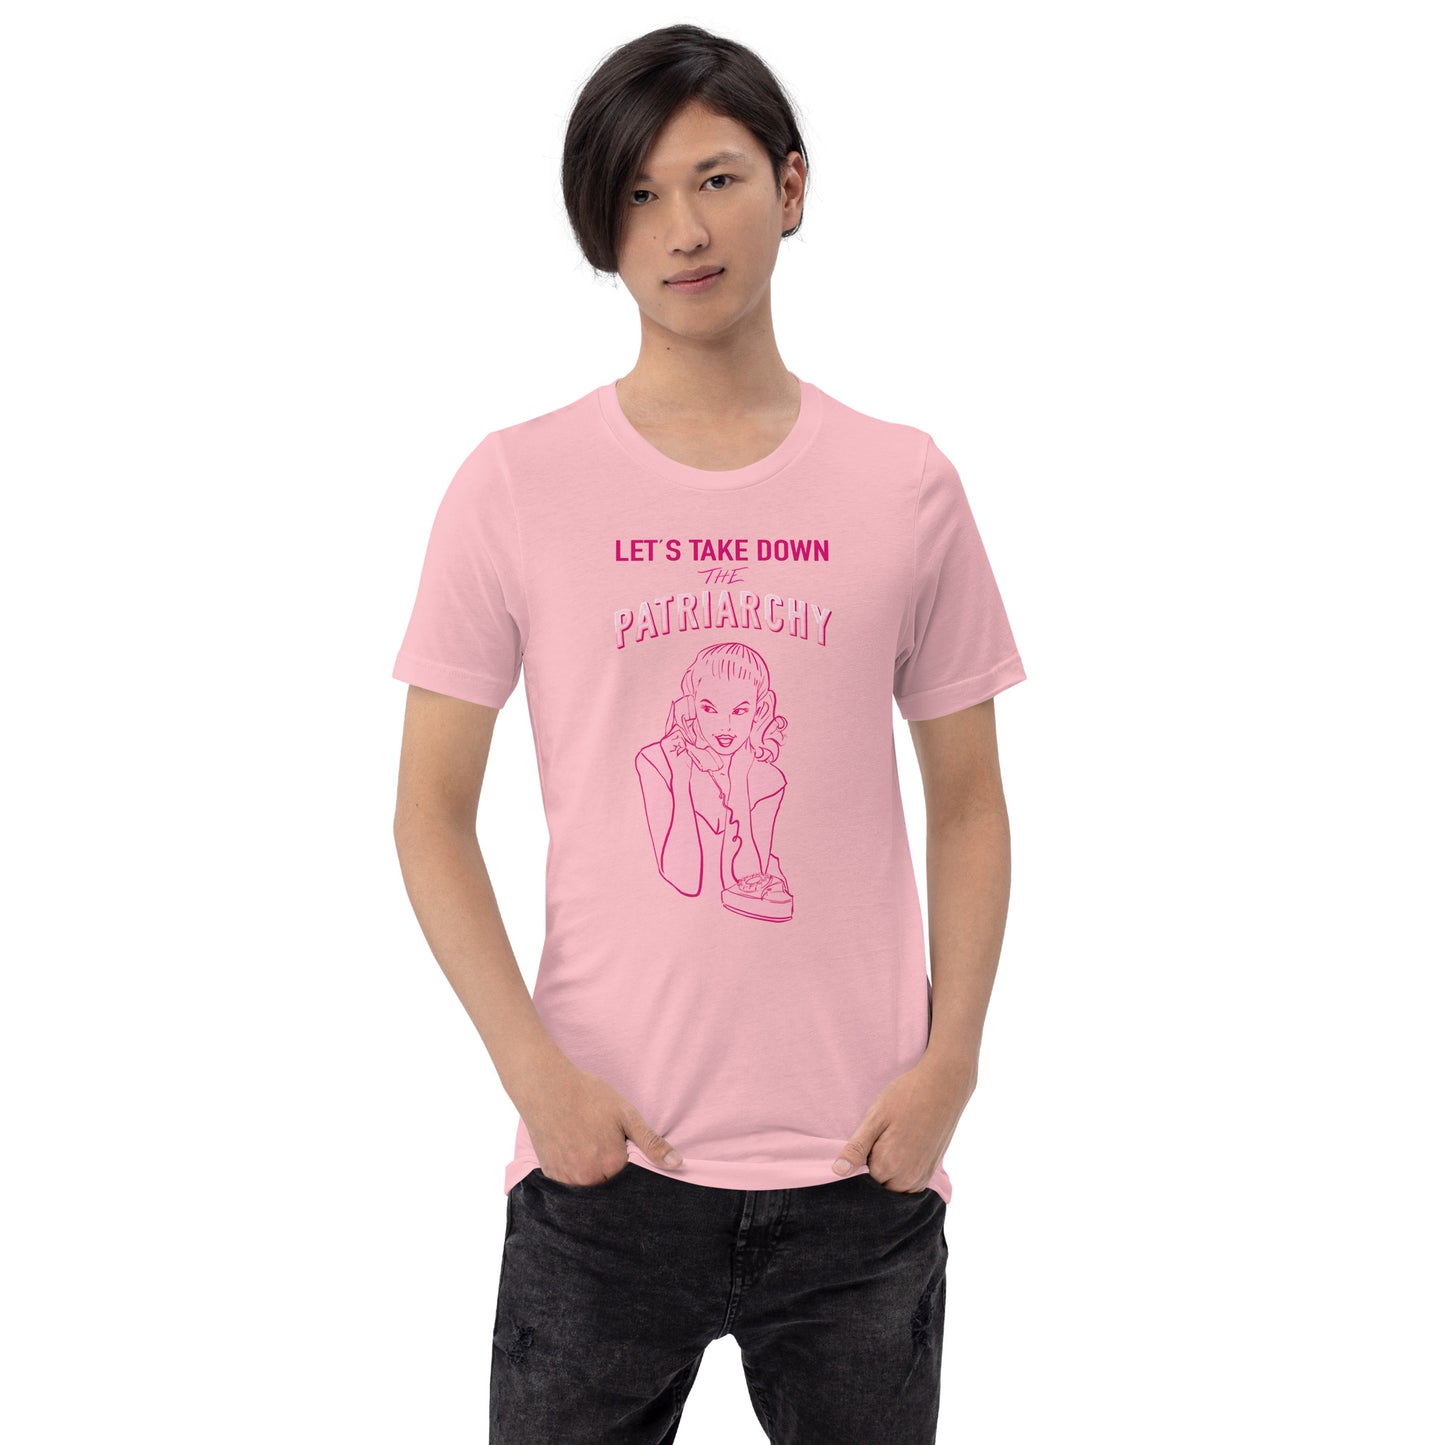 Lets Take Down The Patriarchy Tee in Pink or Ocean Blue